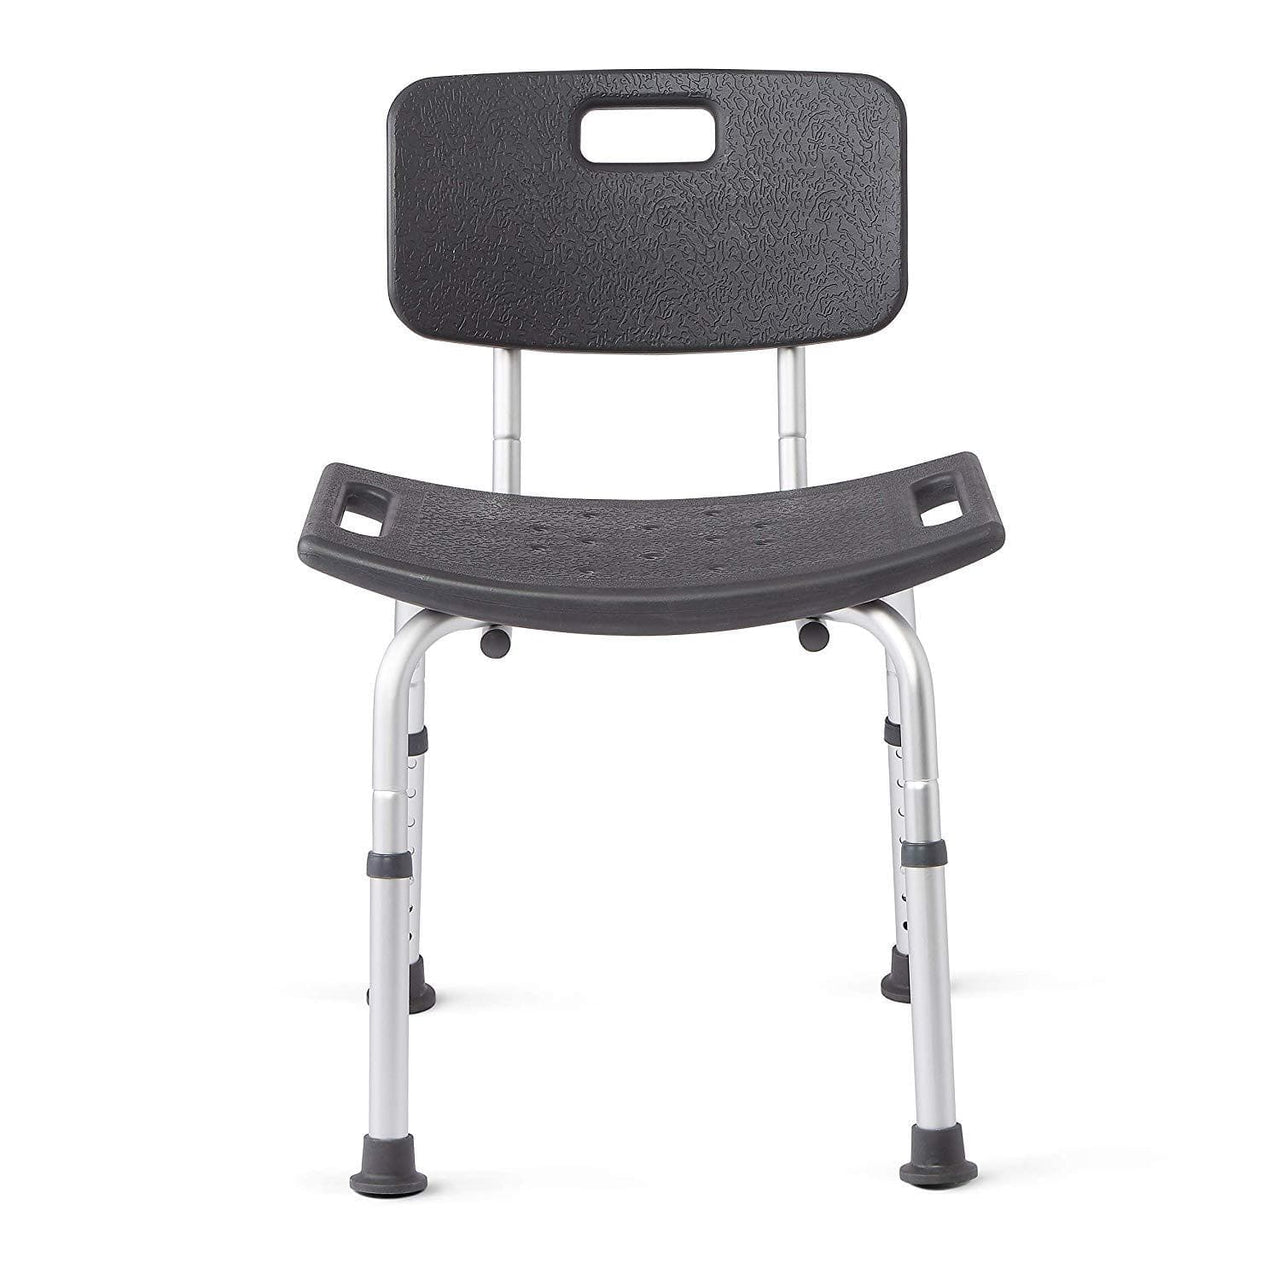 Medline Shower Chair Bath Bench With Back - Infused With Microban Antimicrobial Protection - Senior.com Shower Chairs